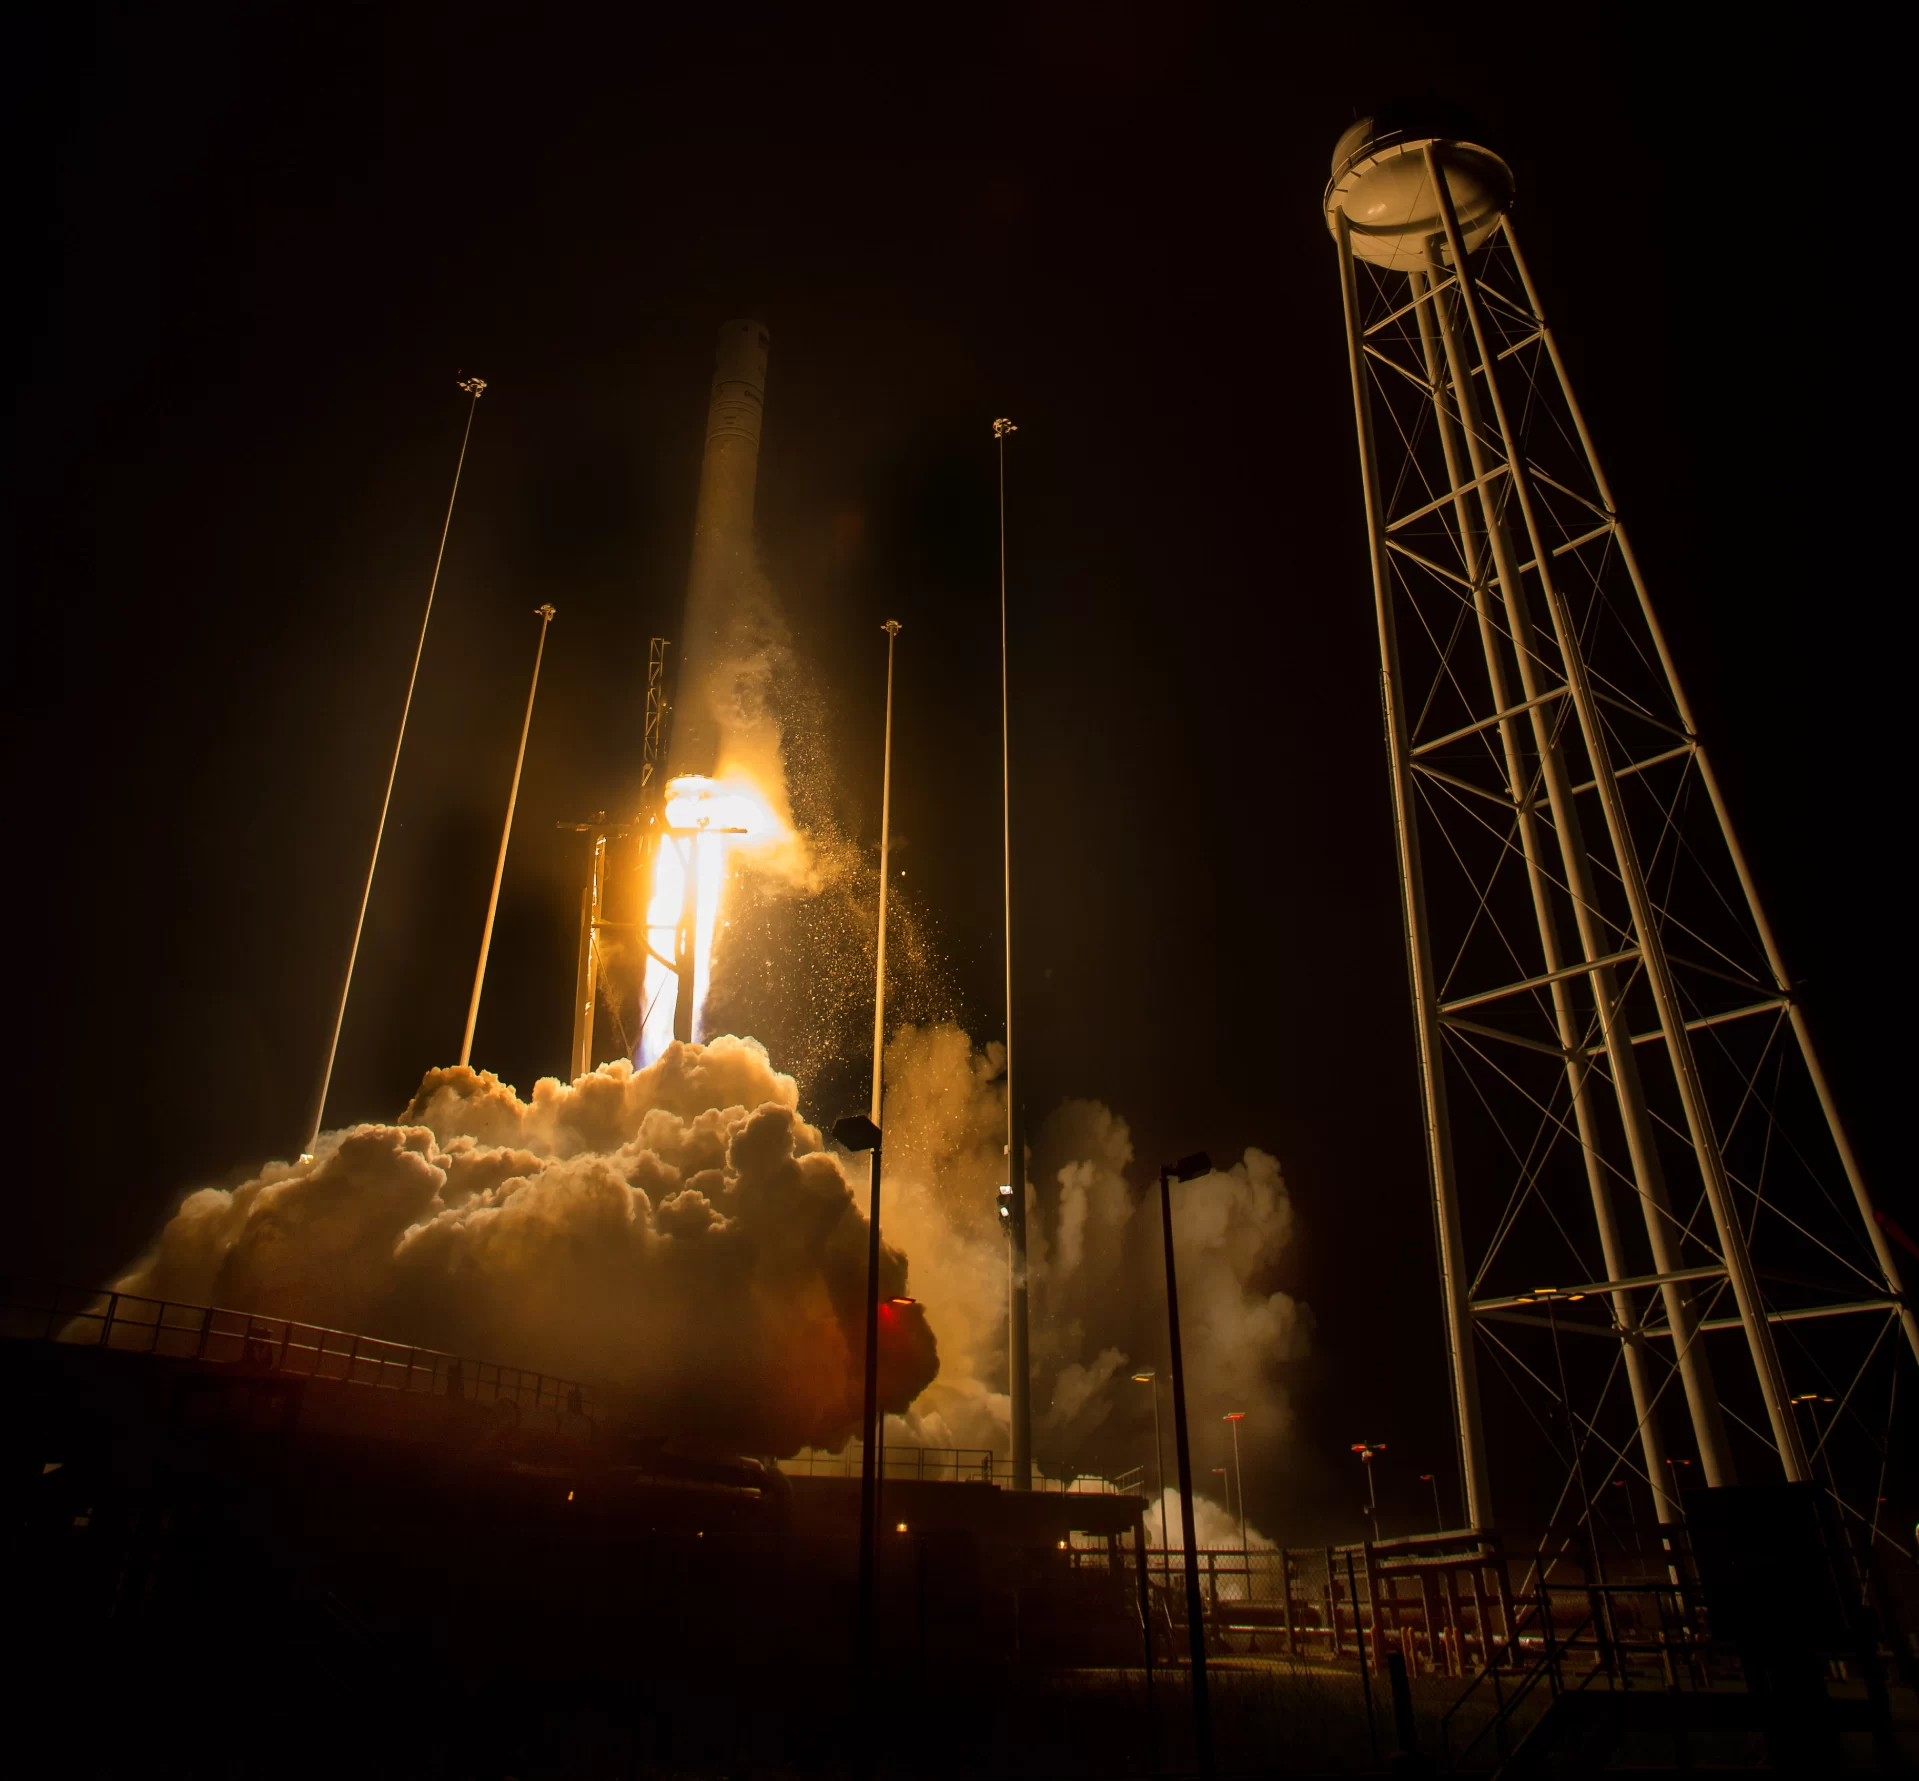 The Orbital ATK Antares rocket, with the Cygnus spacecraft onboard, launches from Pad-0A, Monday, May 21, 2018 at NASA's Wallops Flight Facility in Virginia. Orbital ATK’s ninth contracted cargo resupply mission with NASA to the International Space Station will deliver approximately 7,400 pounds of science and research, crew supplies and vehicle hardware to the orbital laboratory and its crew. Photo Credit: (NASA/Aubrey Gemignani)